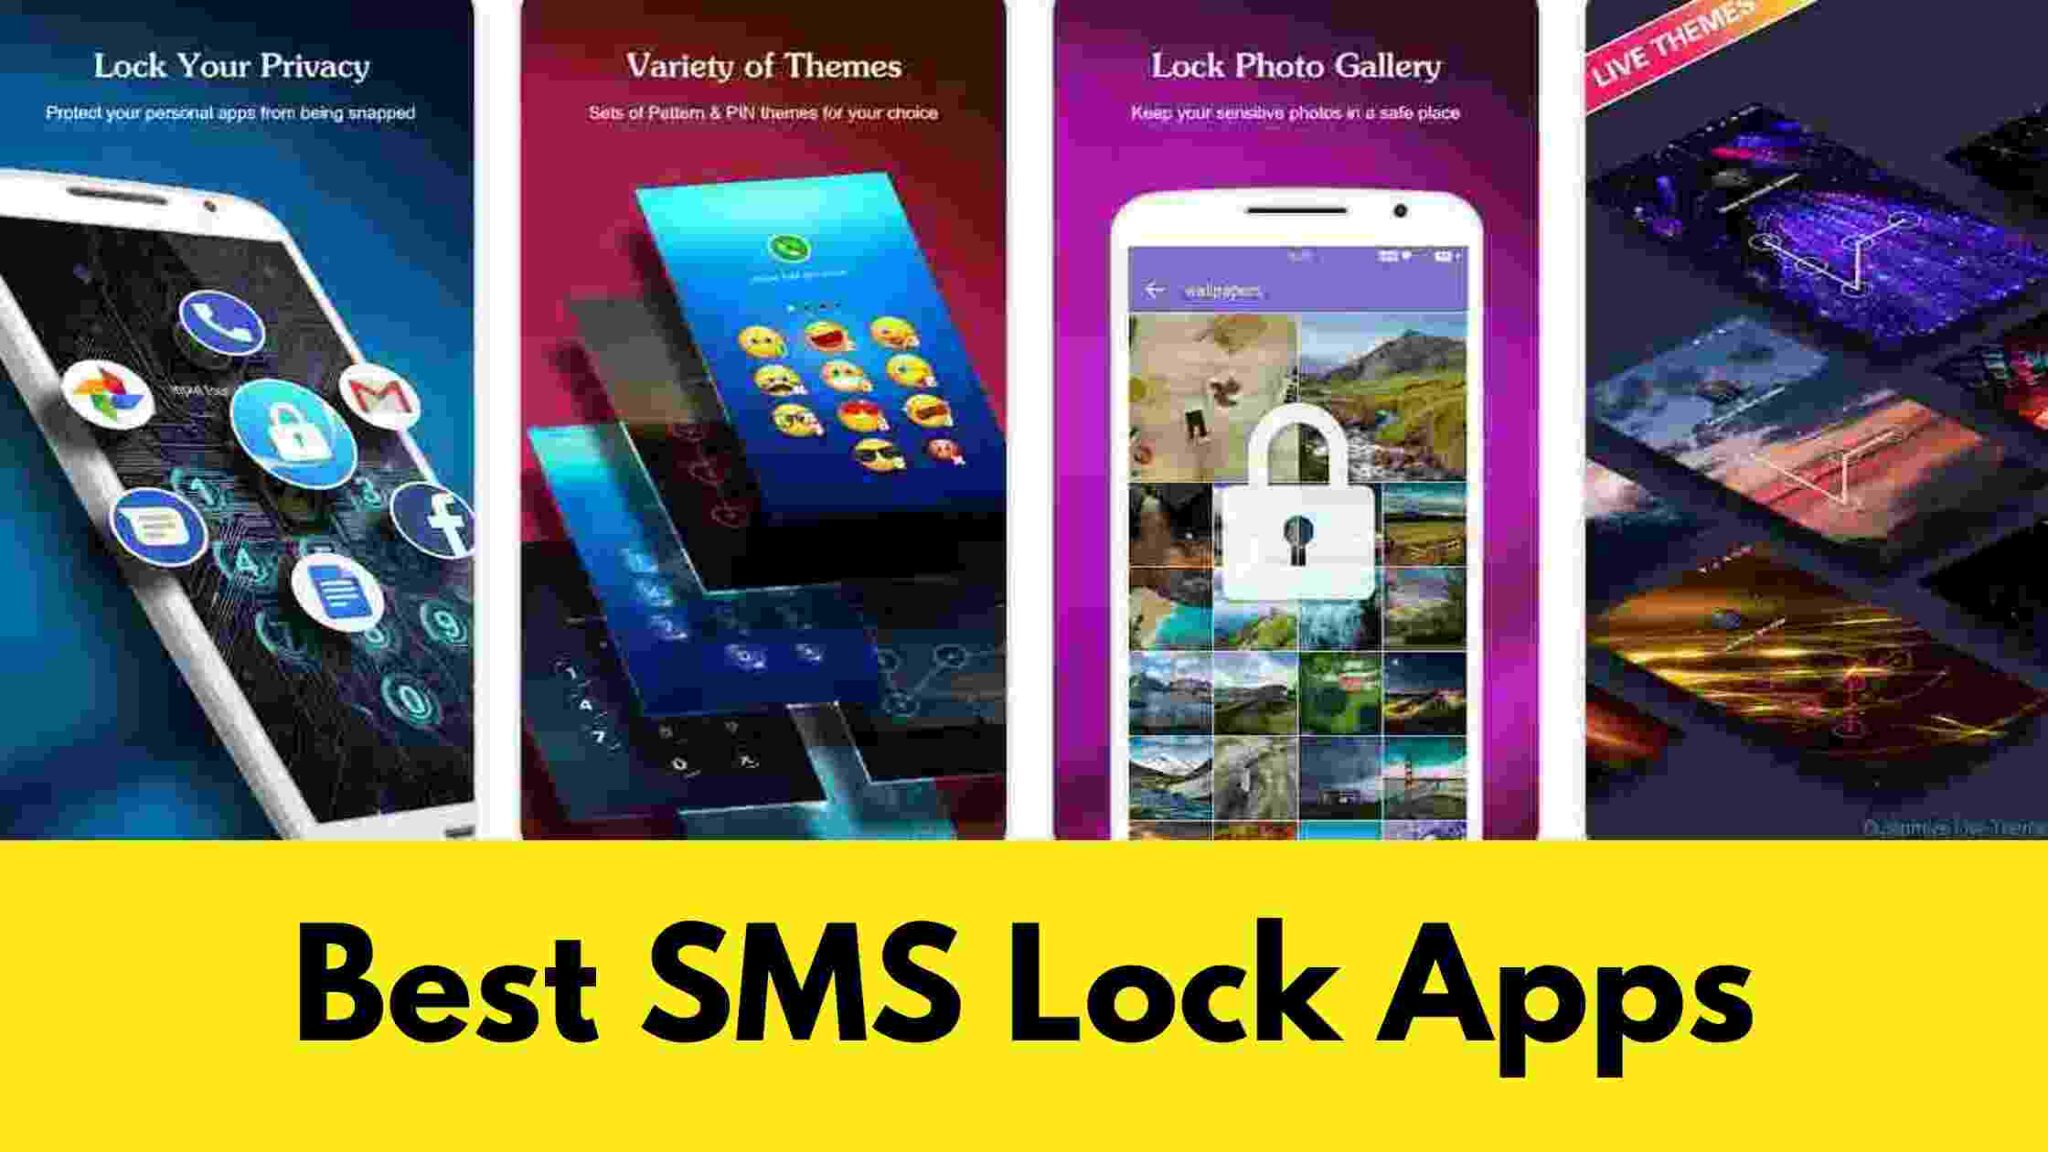 5 Best SMS Lock Apps for Android and iPhone